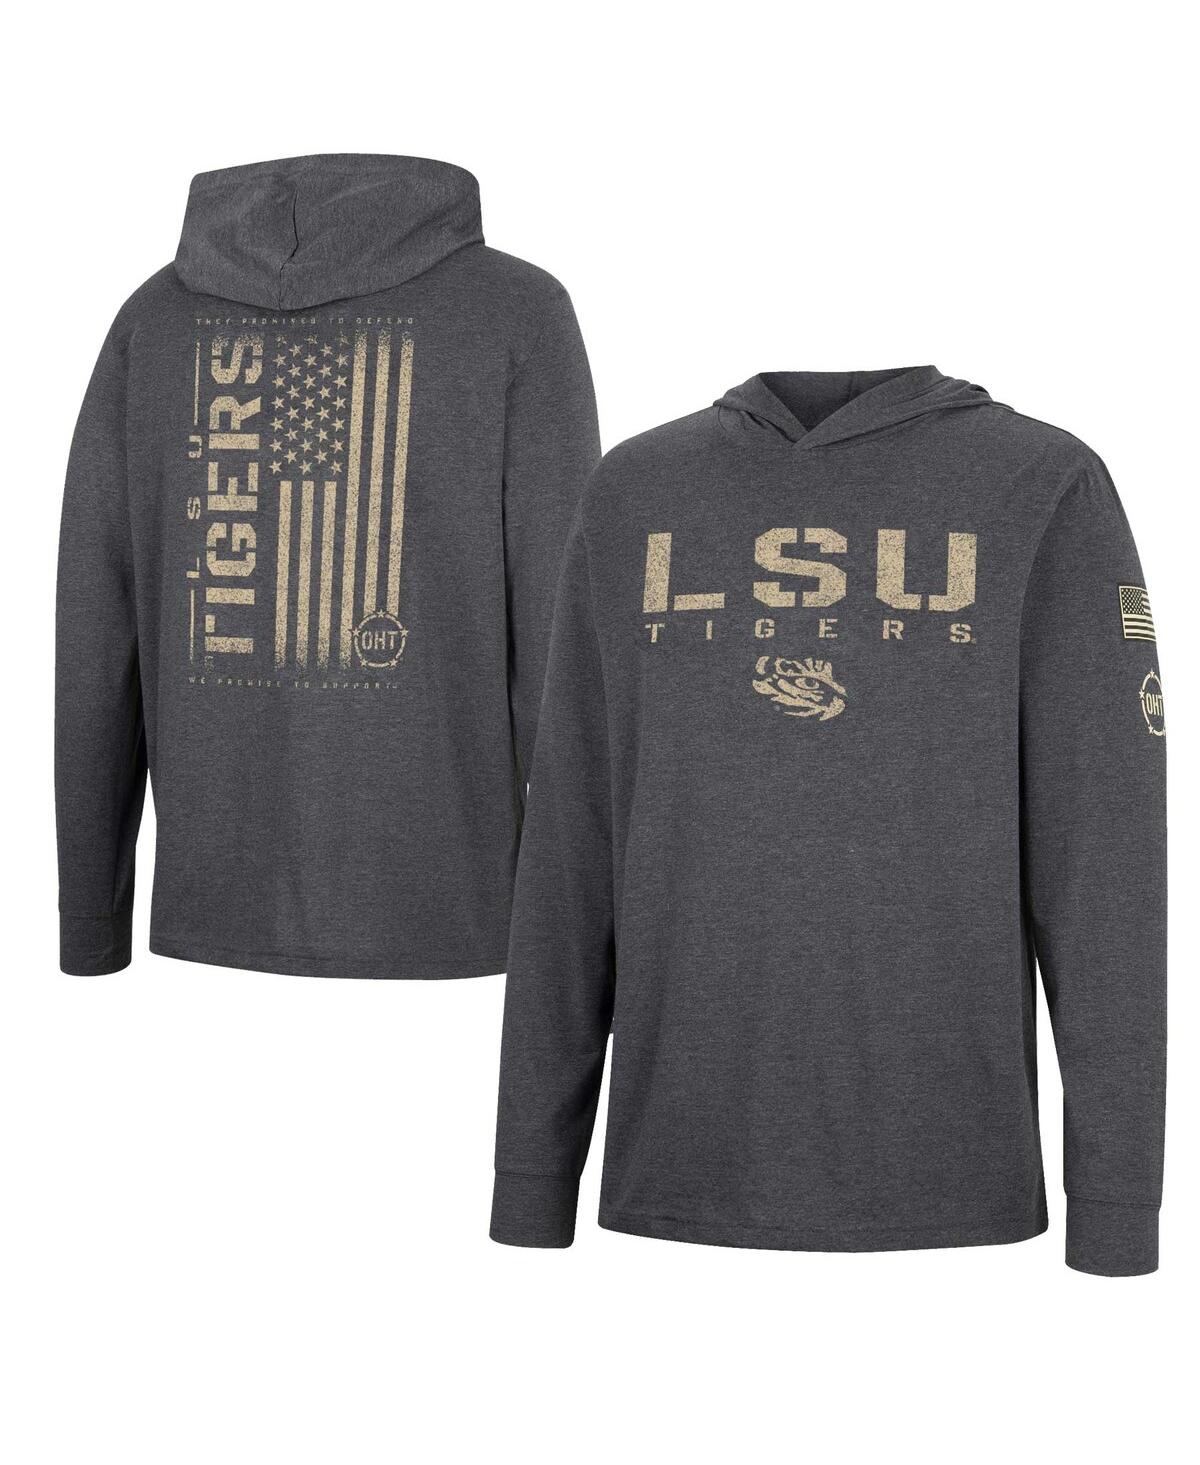 Colosseum Men's  Charcoal Lsu Tigers Team Oht Military-inspired Appreciation Hoodie Long Sleeve T-shi